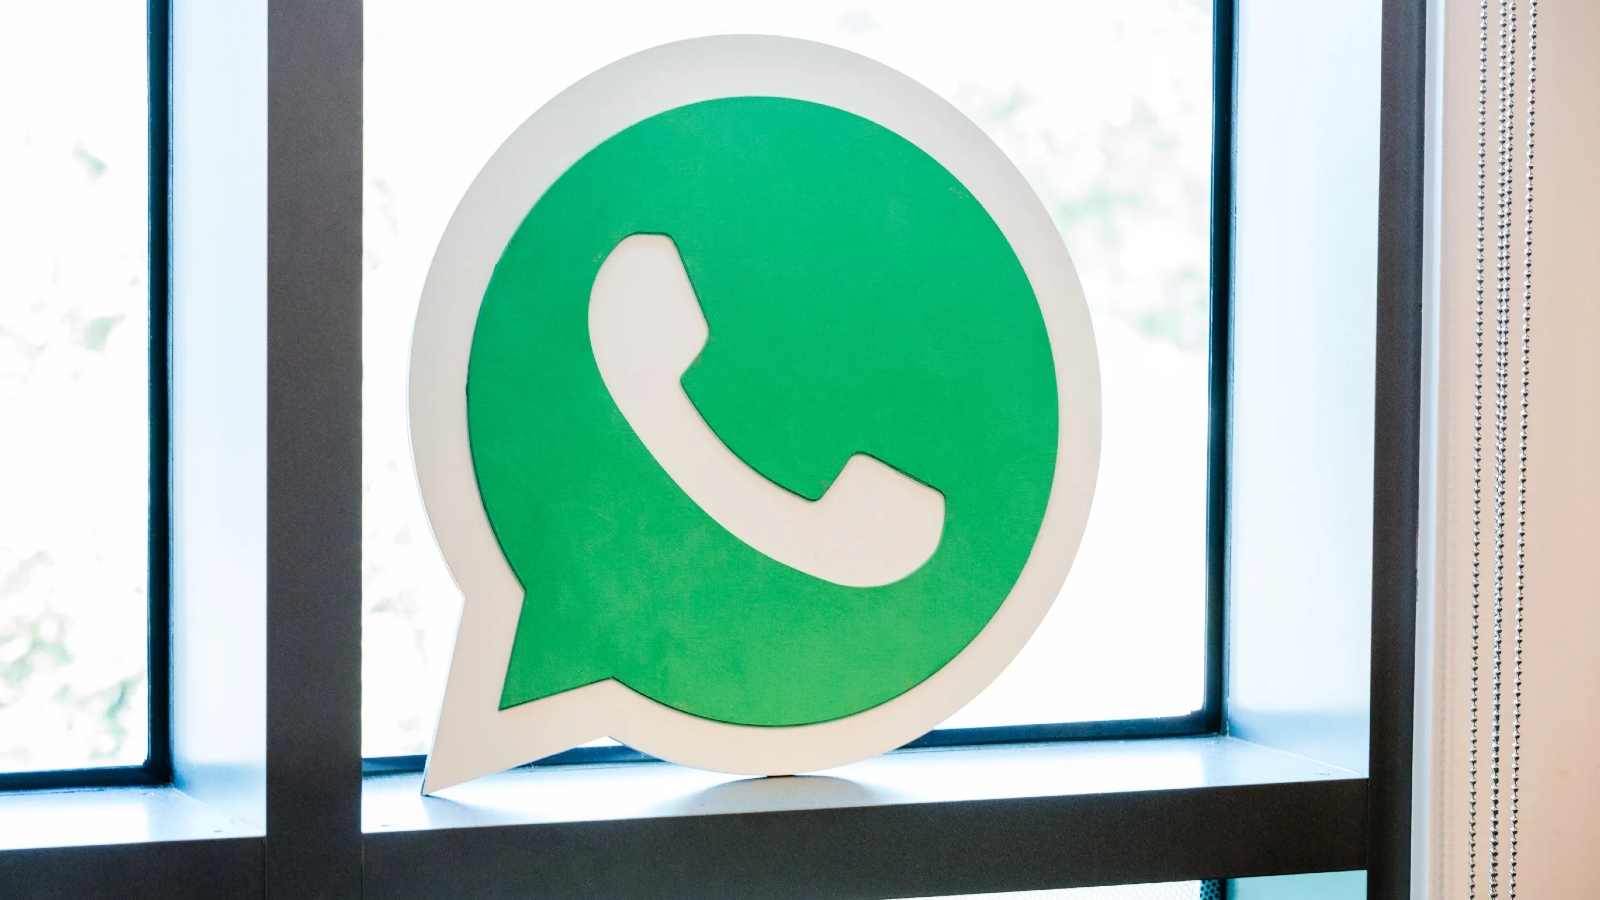 How to send HD photos and videos on WhatsApp - The Indian Express